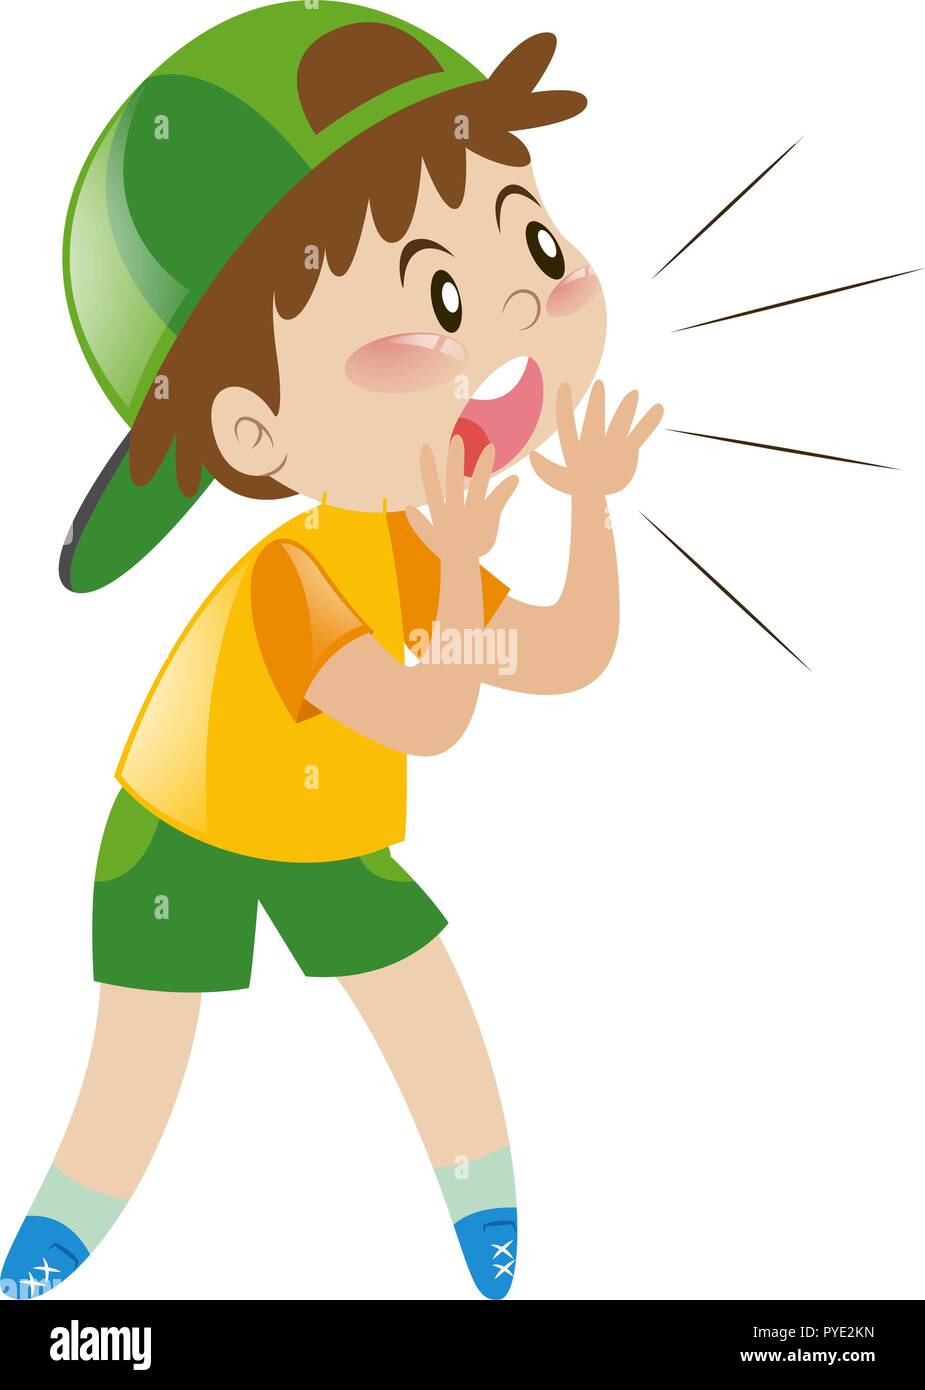 Little boy with green hat shouting illustration Stock Vector